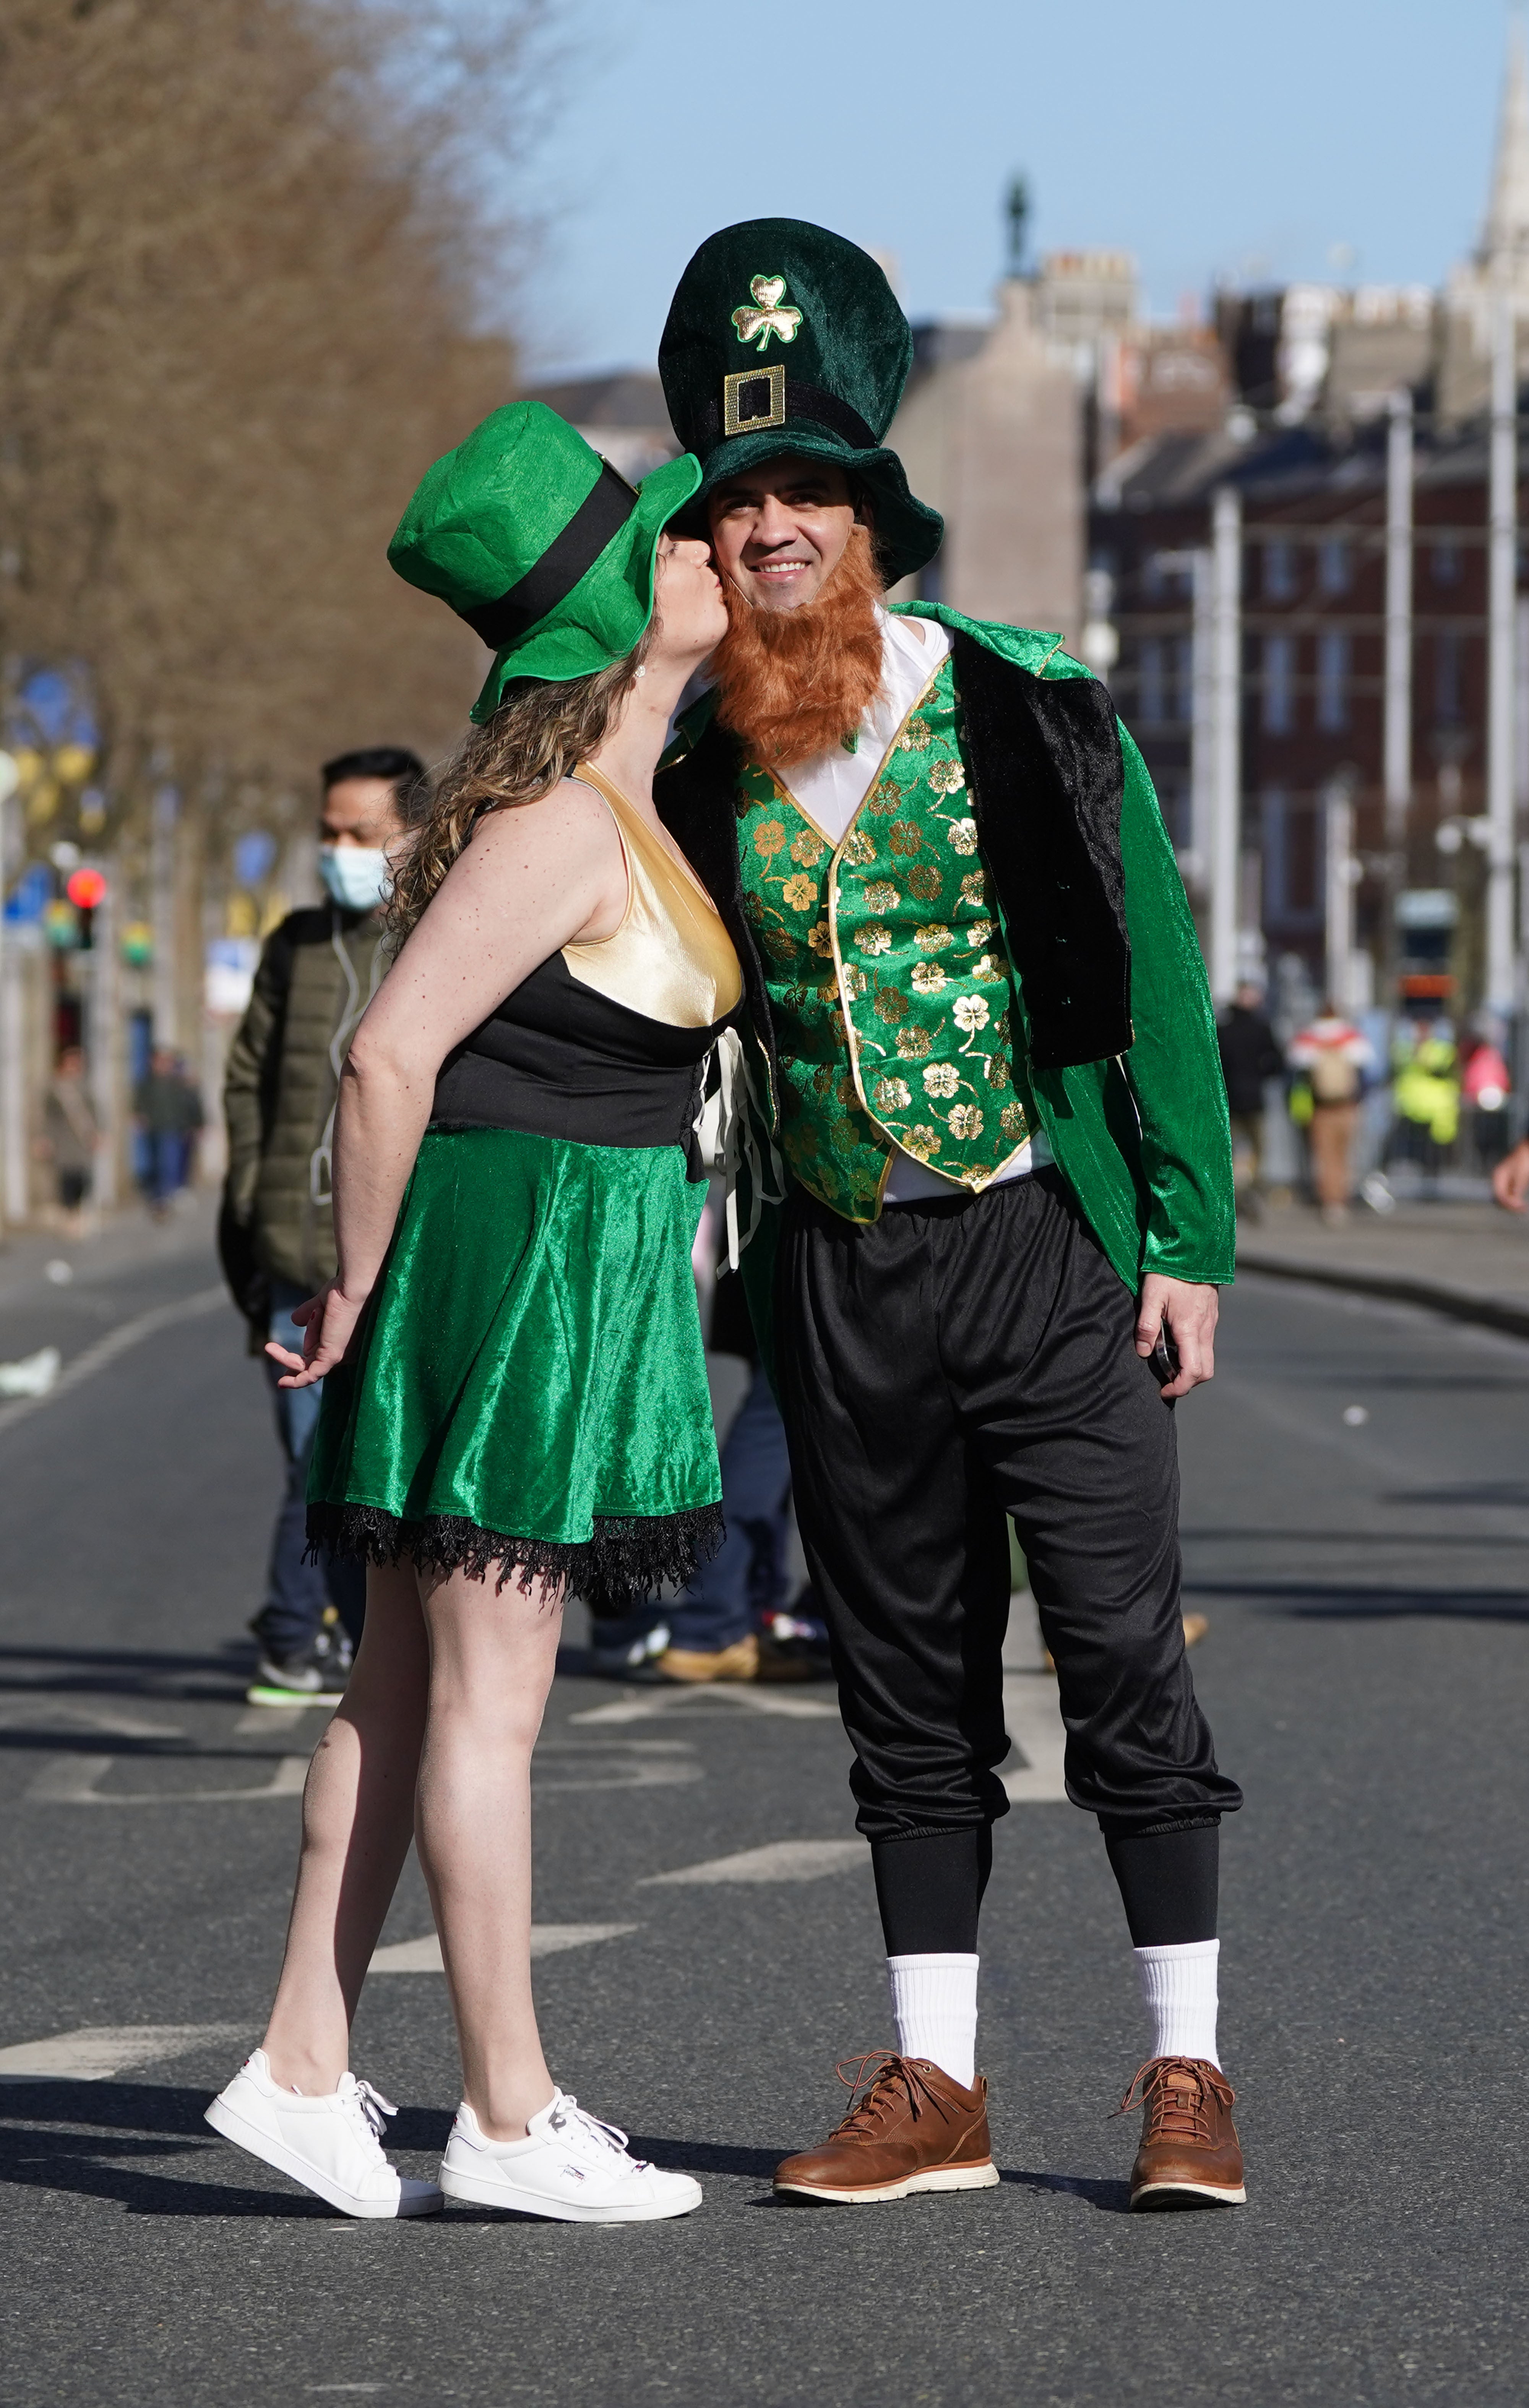 Anna DeAngelis and Bruno Ferranti, from Brazil, dressed up for the St Patrick’s Day Parade in Dublin (Brian Lawless/PA)